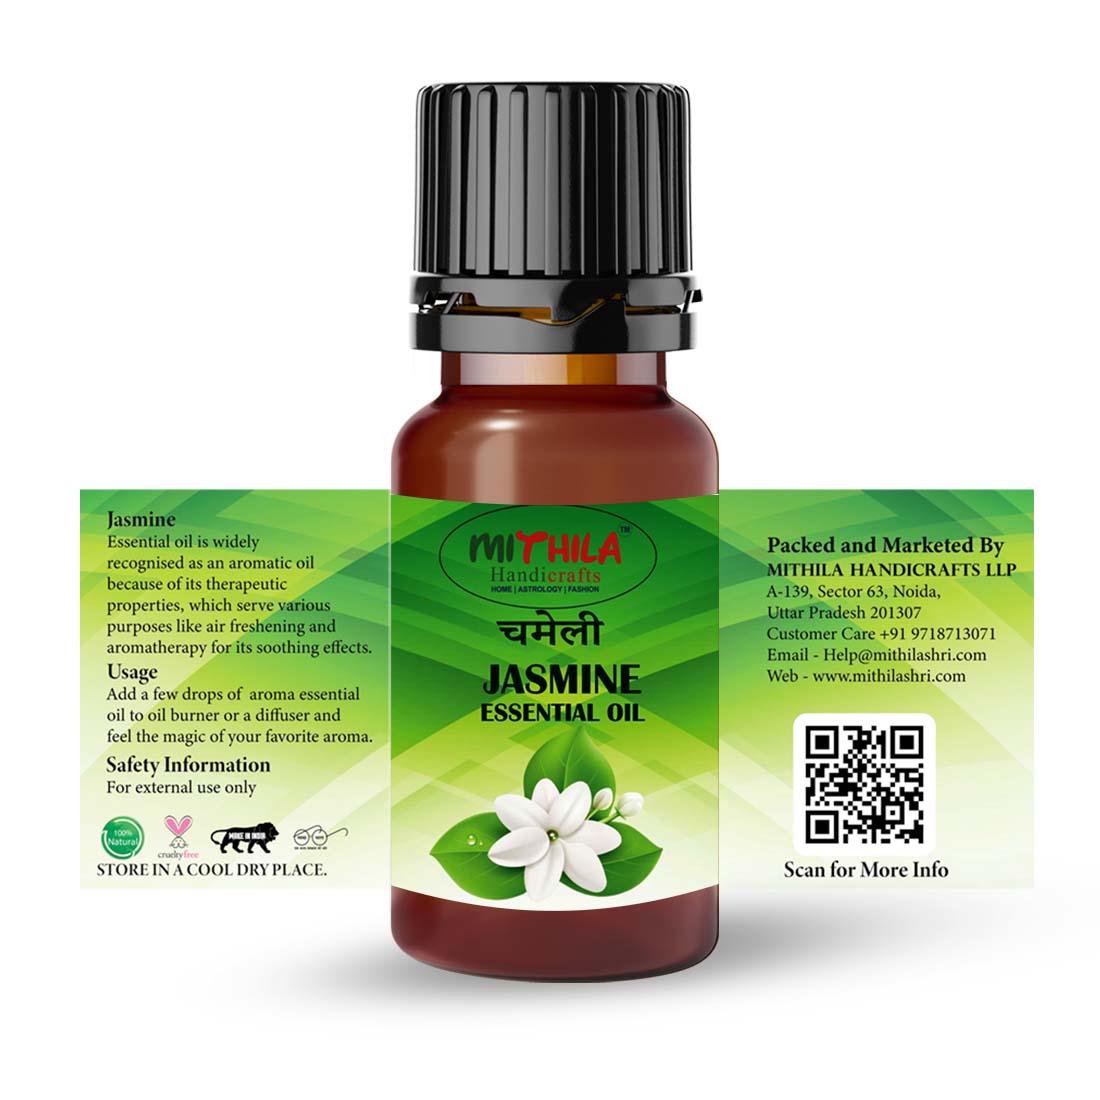 Jasmine Essential Oil For Skin, Hair Care, Home Fragrance, Aroma Therapy 15ml (Pack of 2)